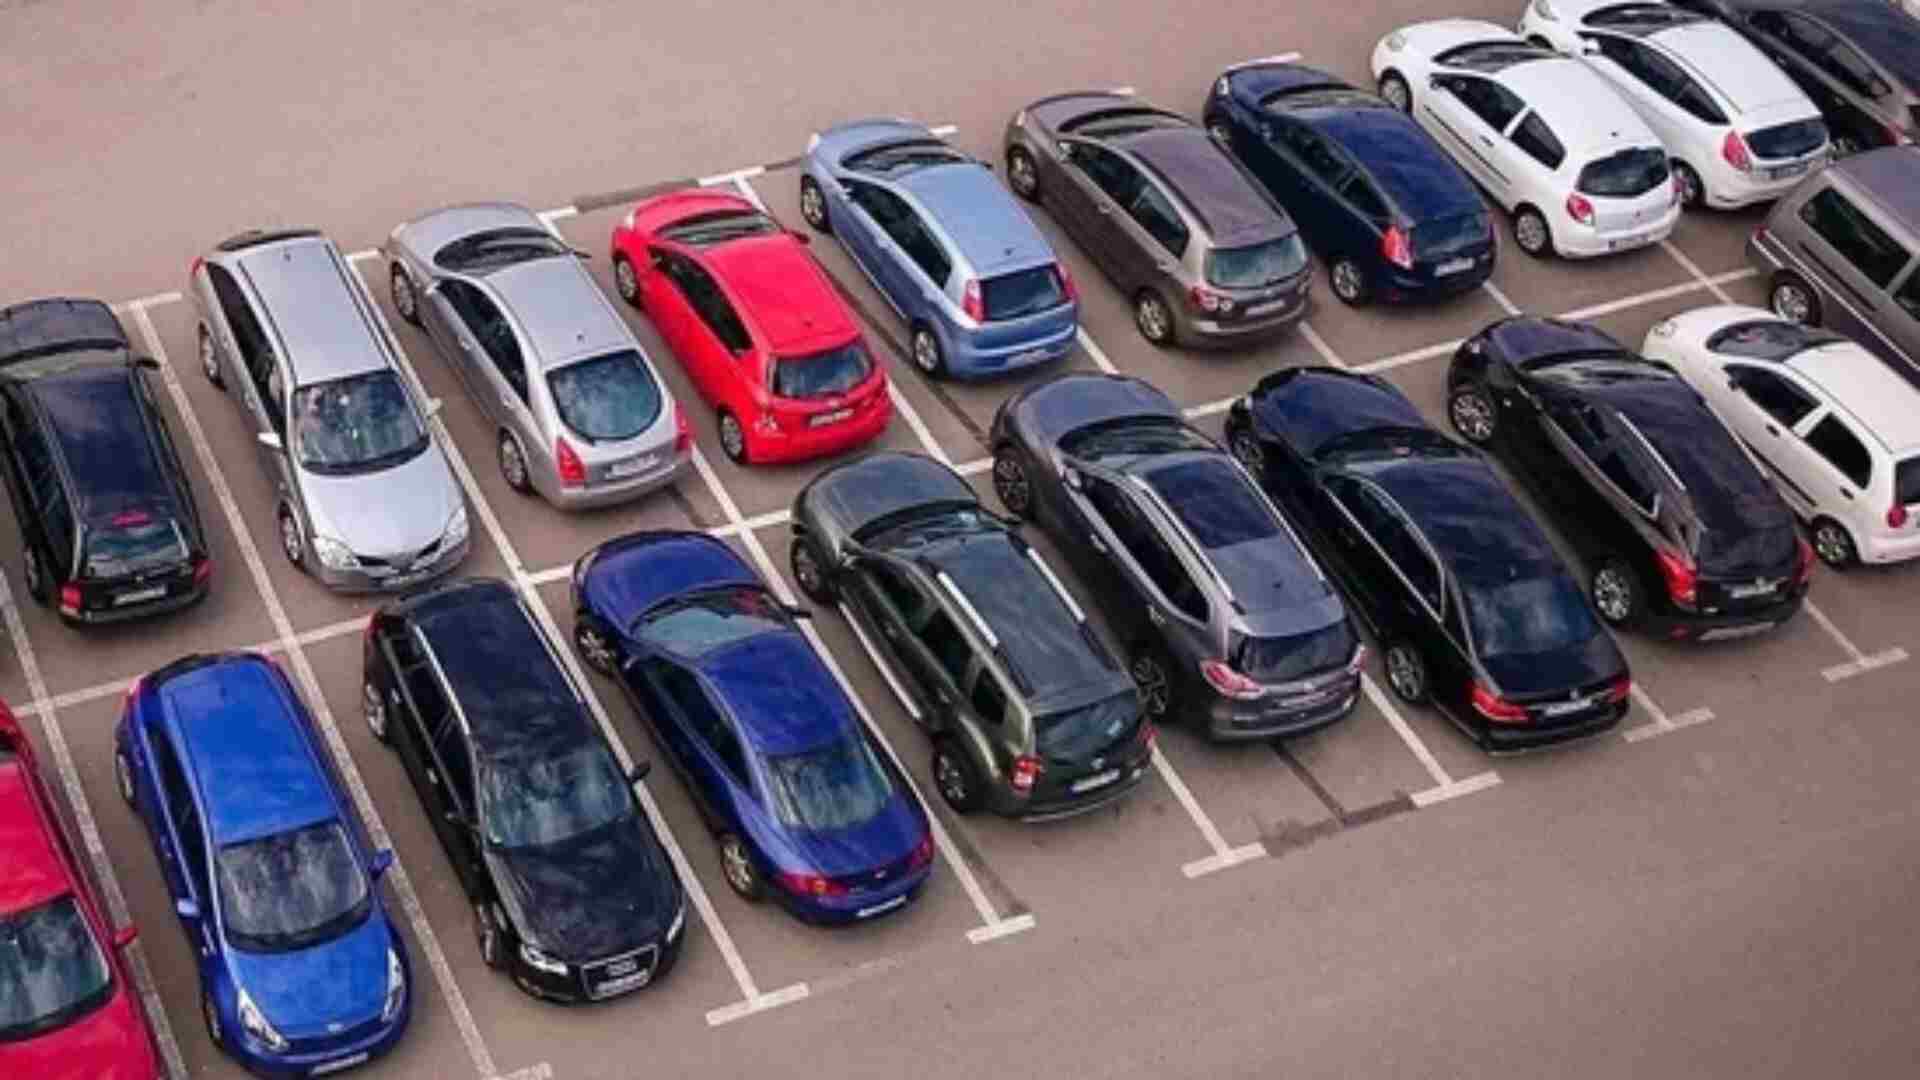 Kerala To Launch Mobile App For Parking Space (Representative Image)